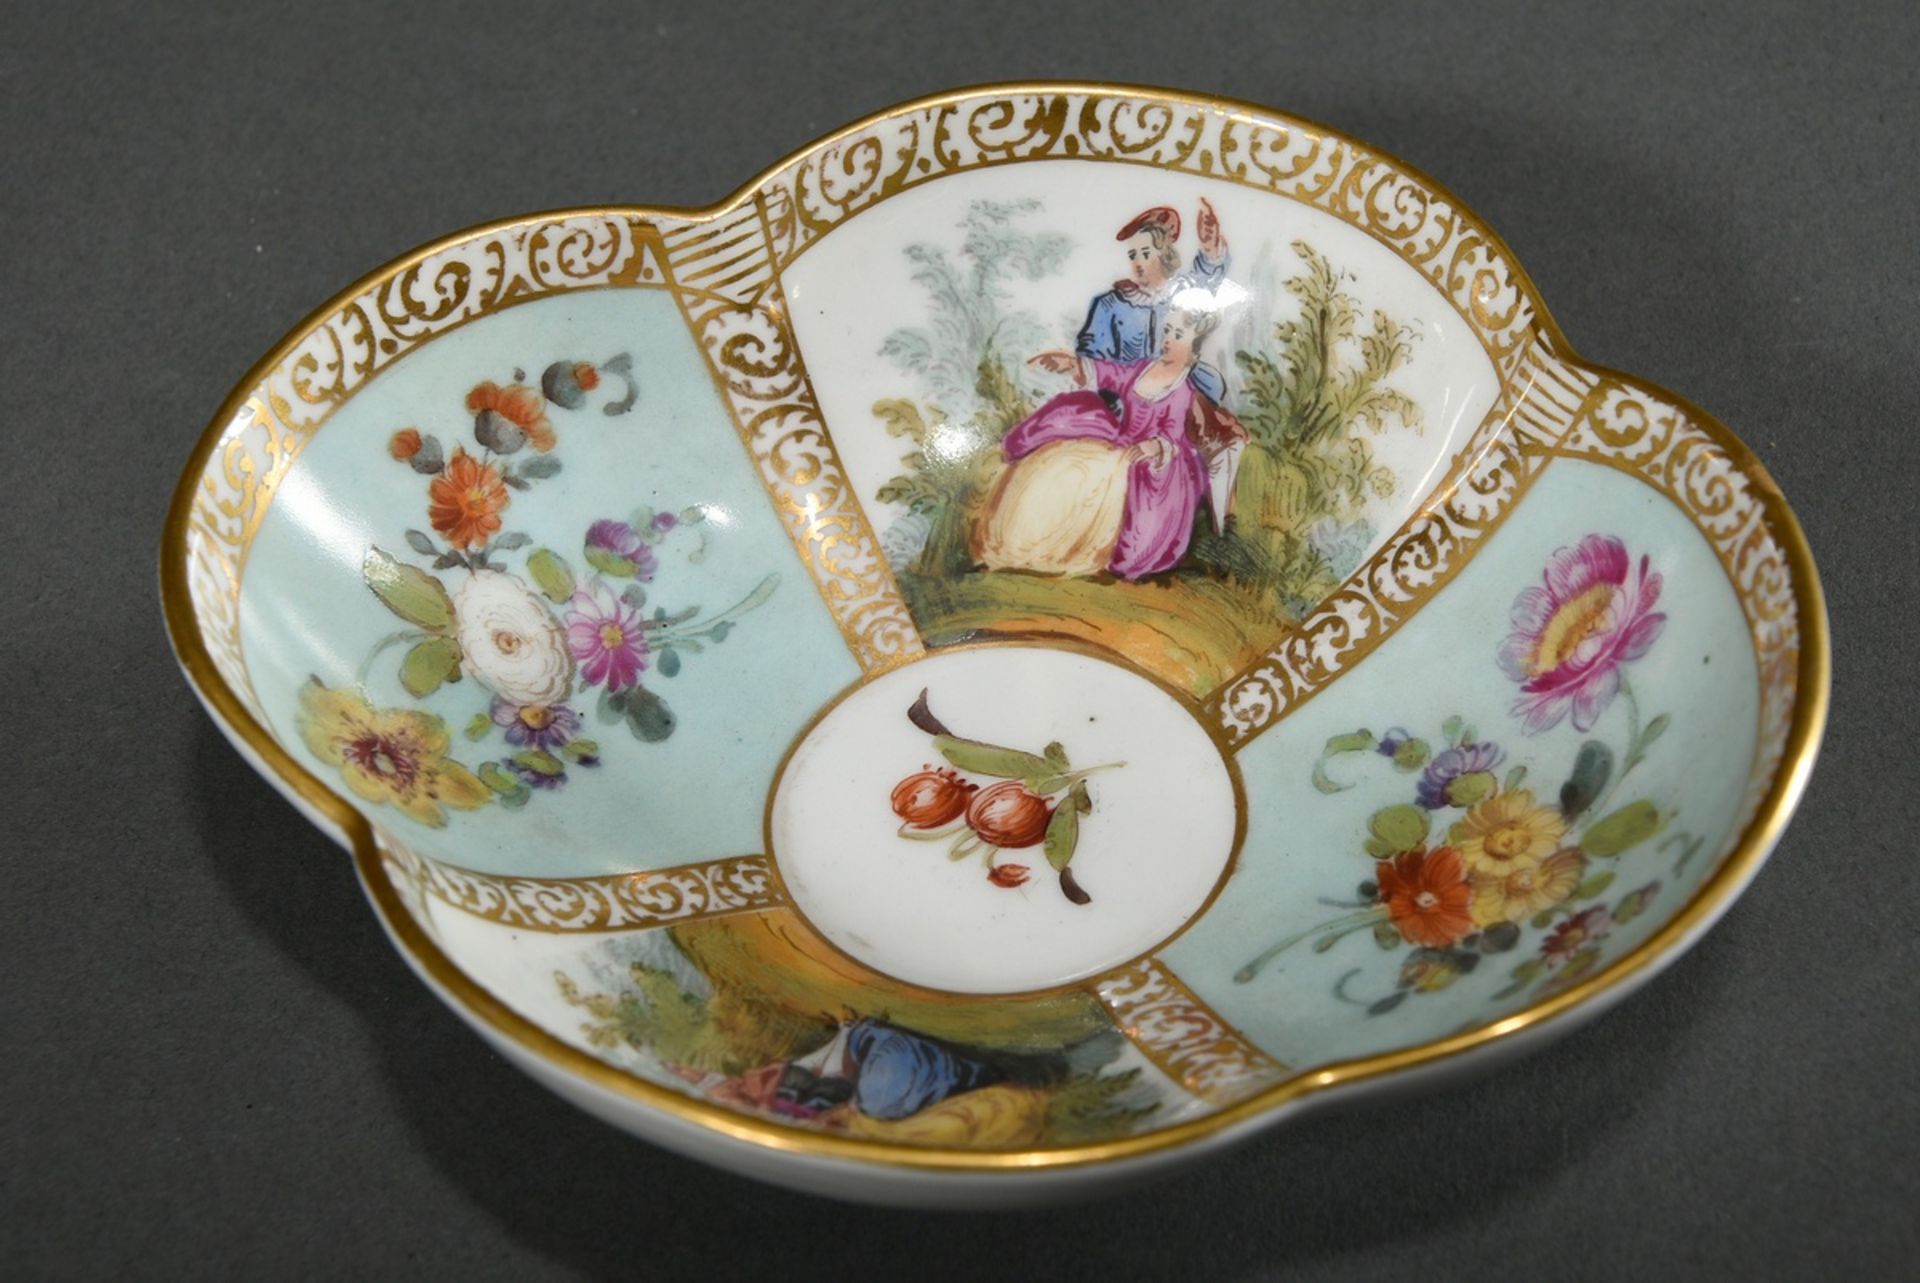 A four-piece porcelain cup/saucer with polychrome painting "Lovers" and "Blossoms" on a turquoise b - Image 4 of 8